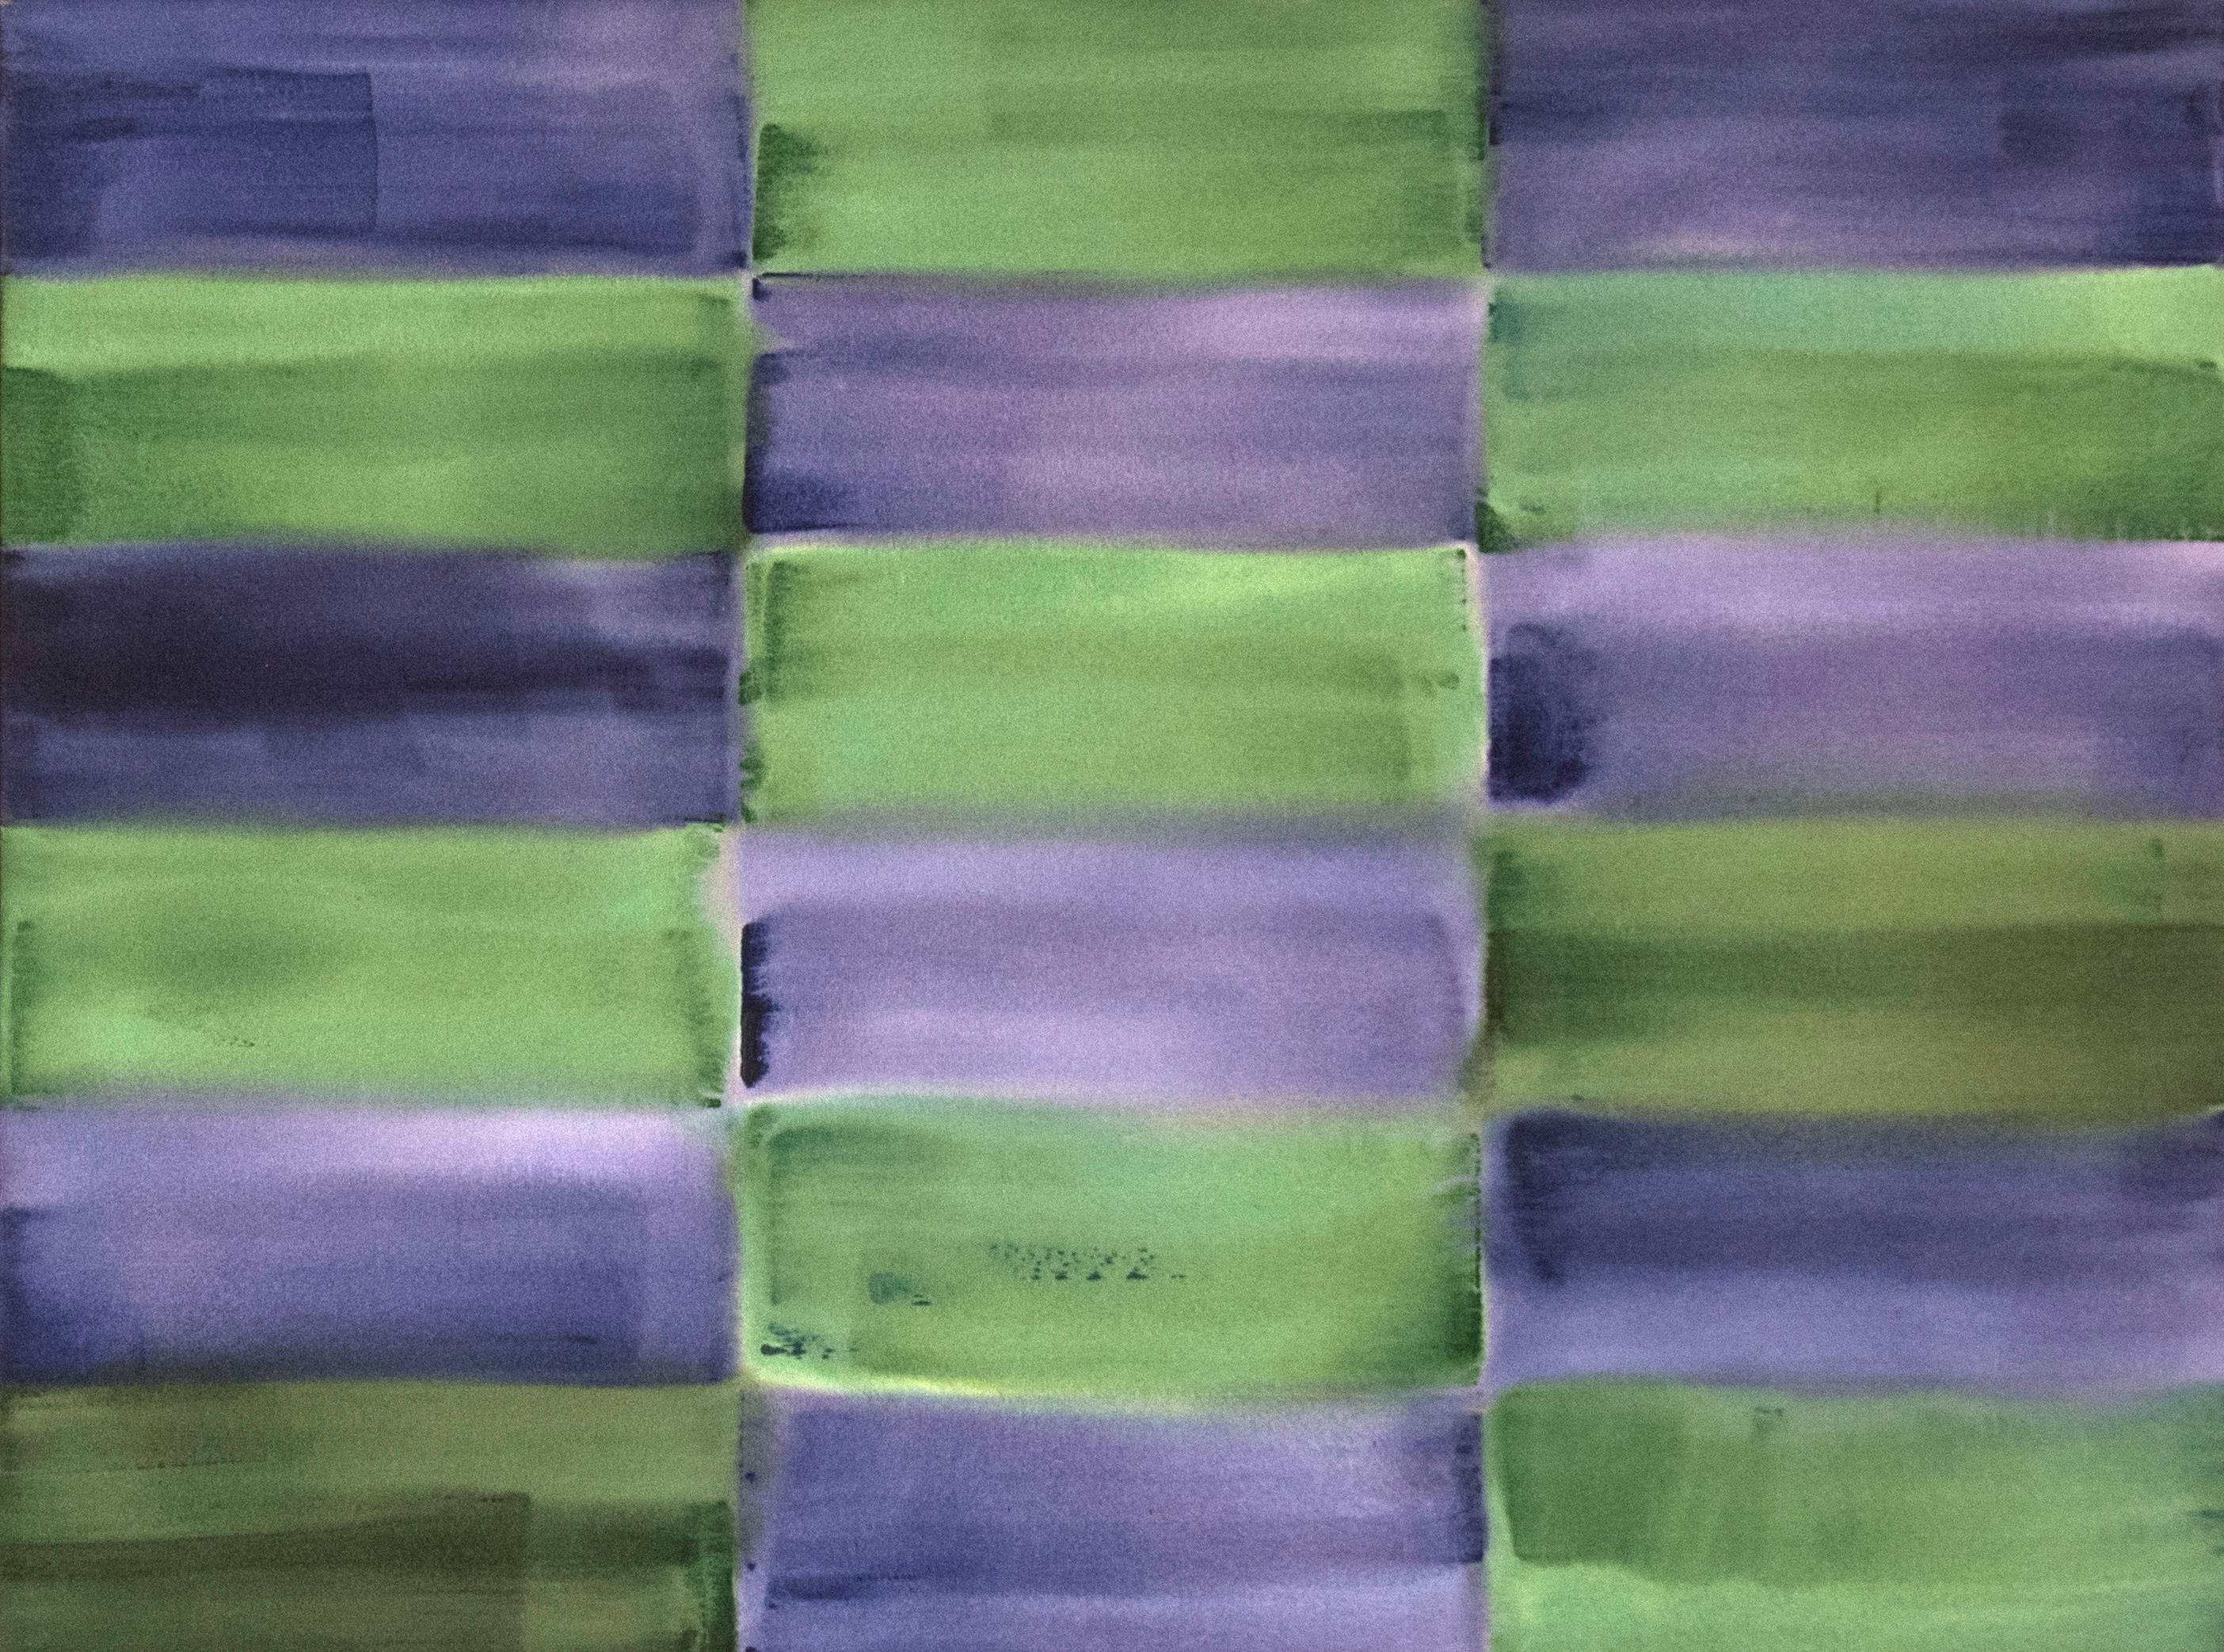 Winter Solstice - purple and green grid, geometric abstract, acrylic on canvas - Painting by Milly Ristvedt